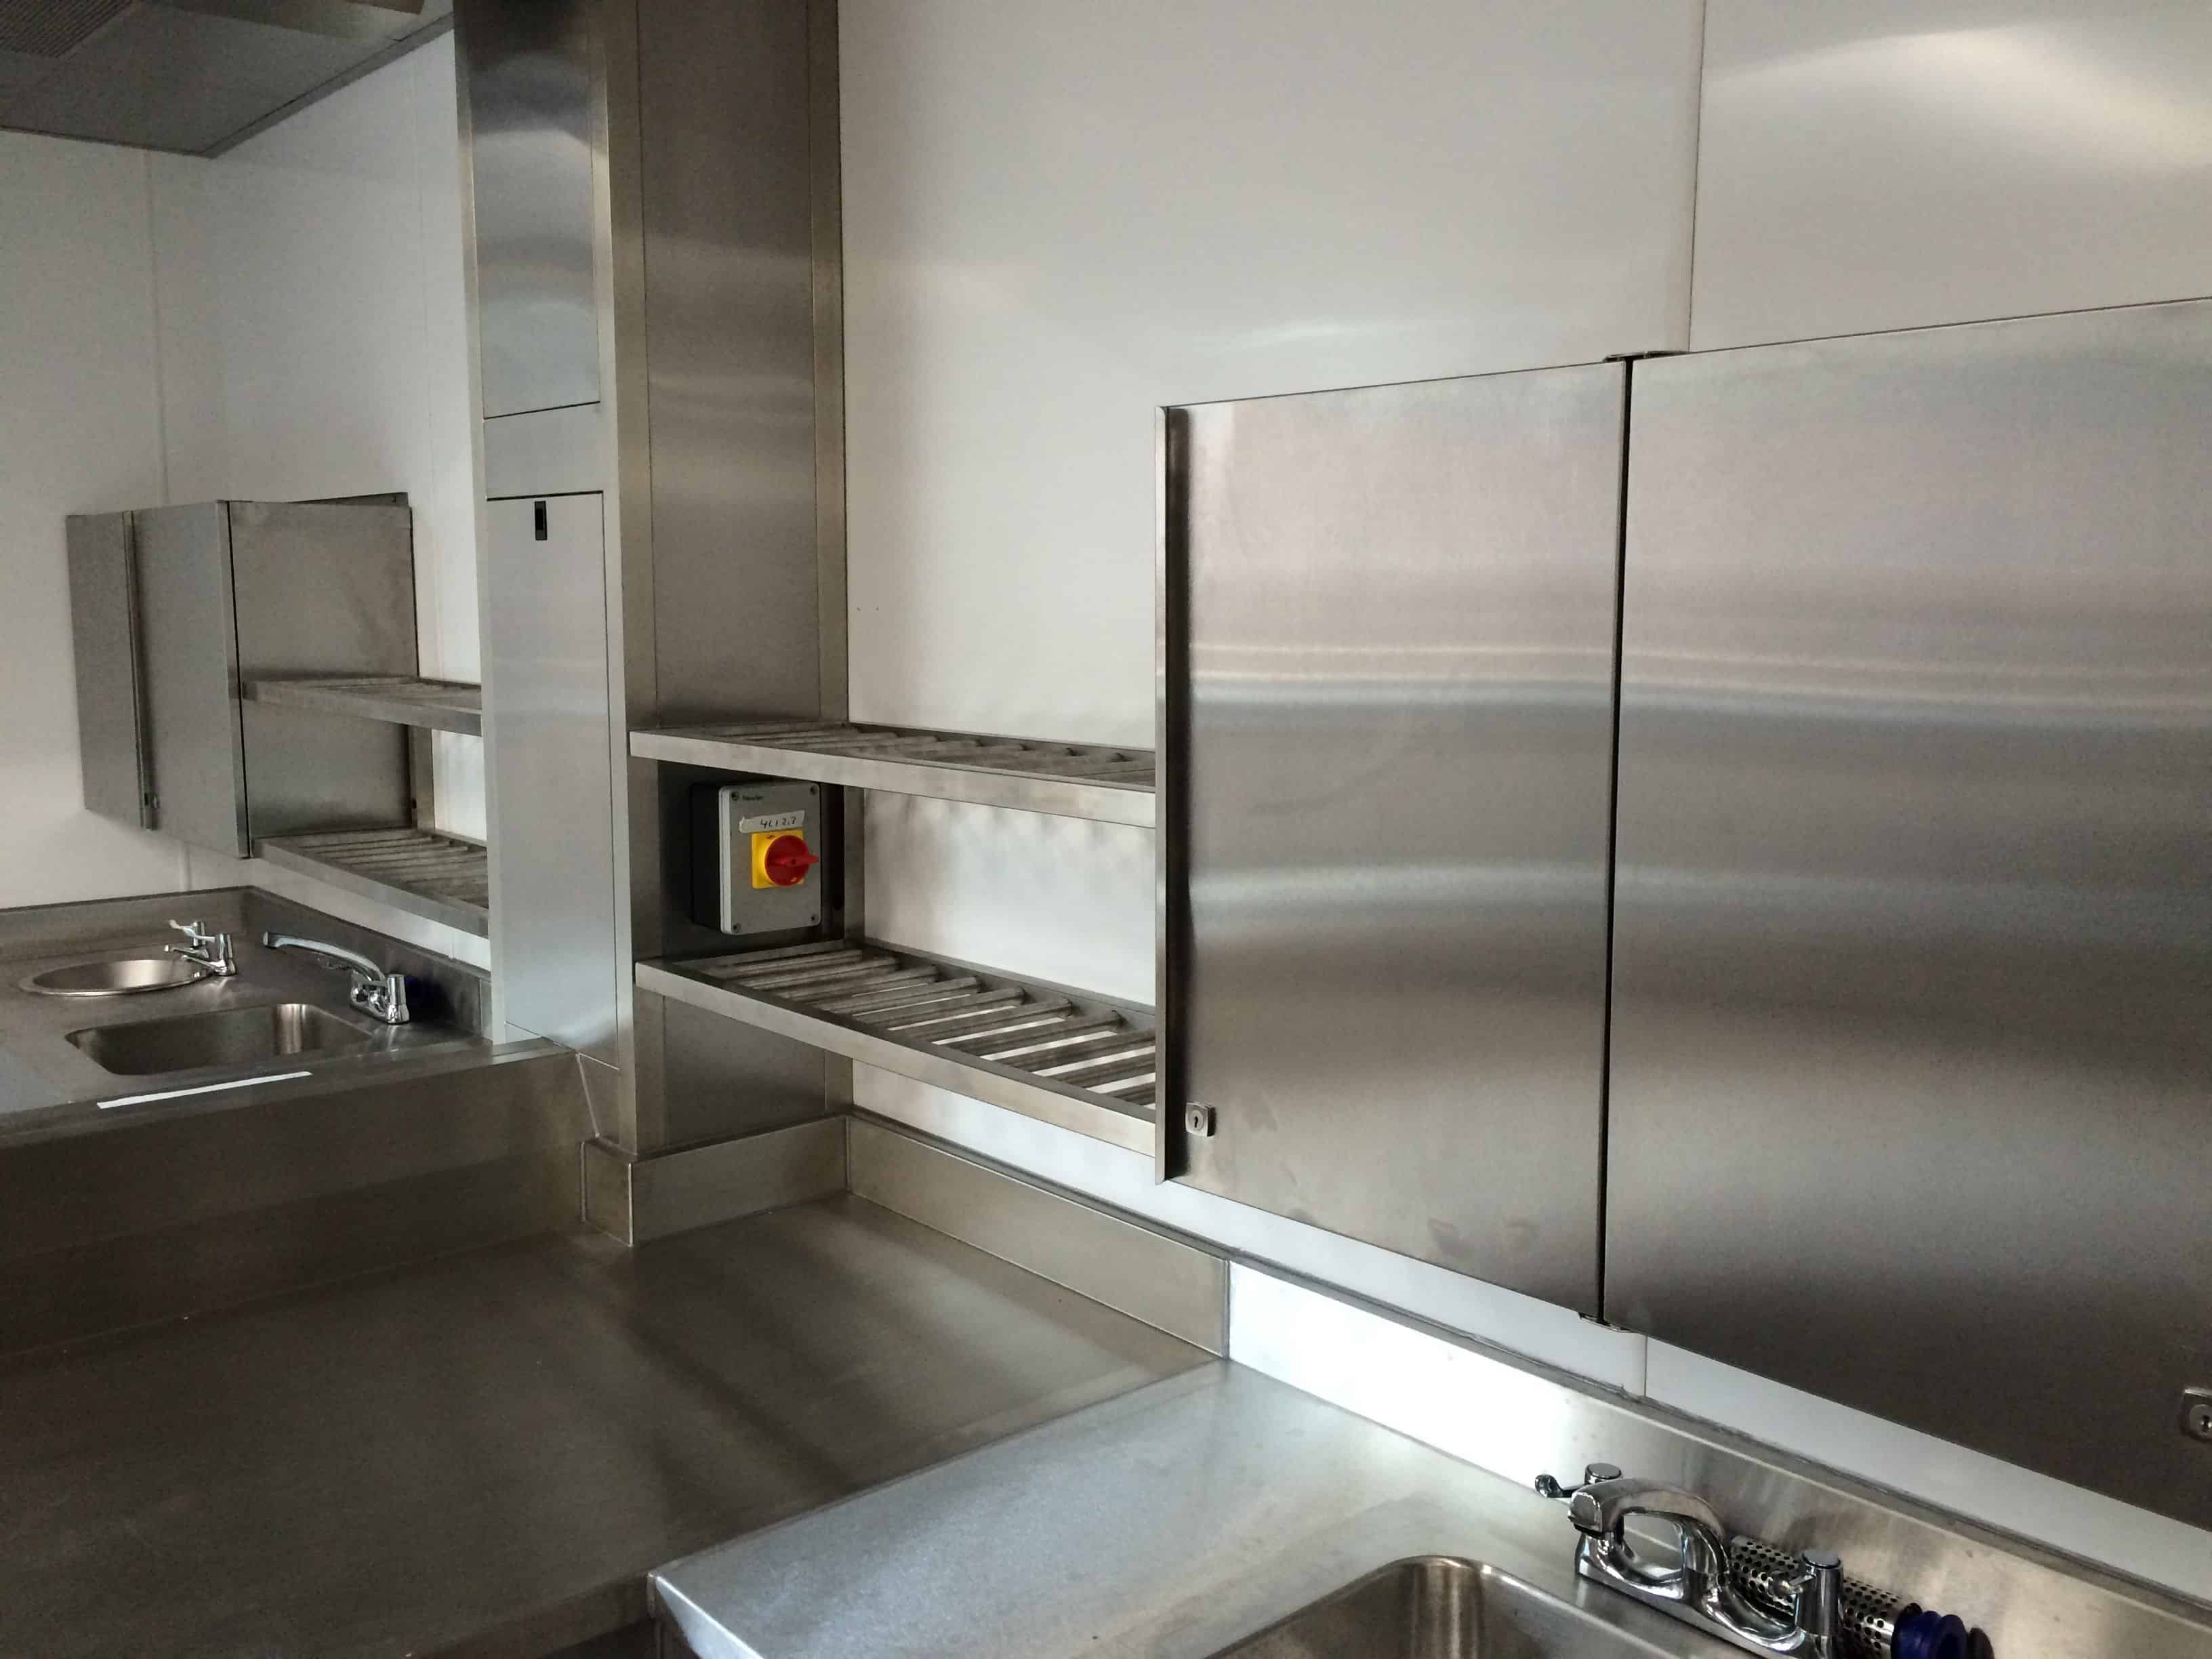 stainless steel cupboards